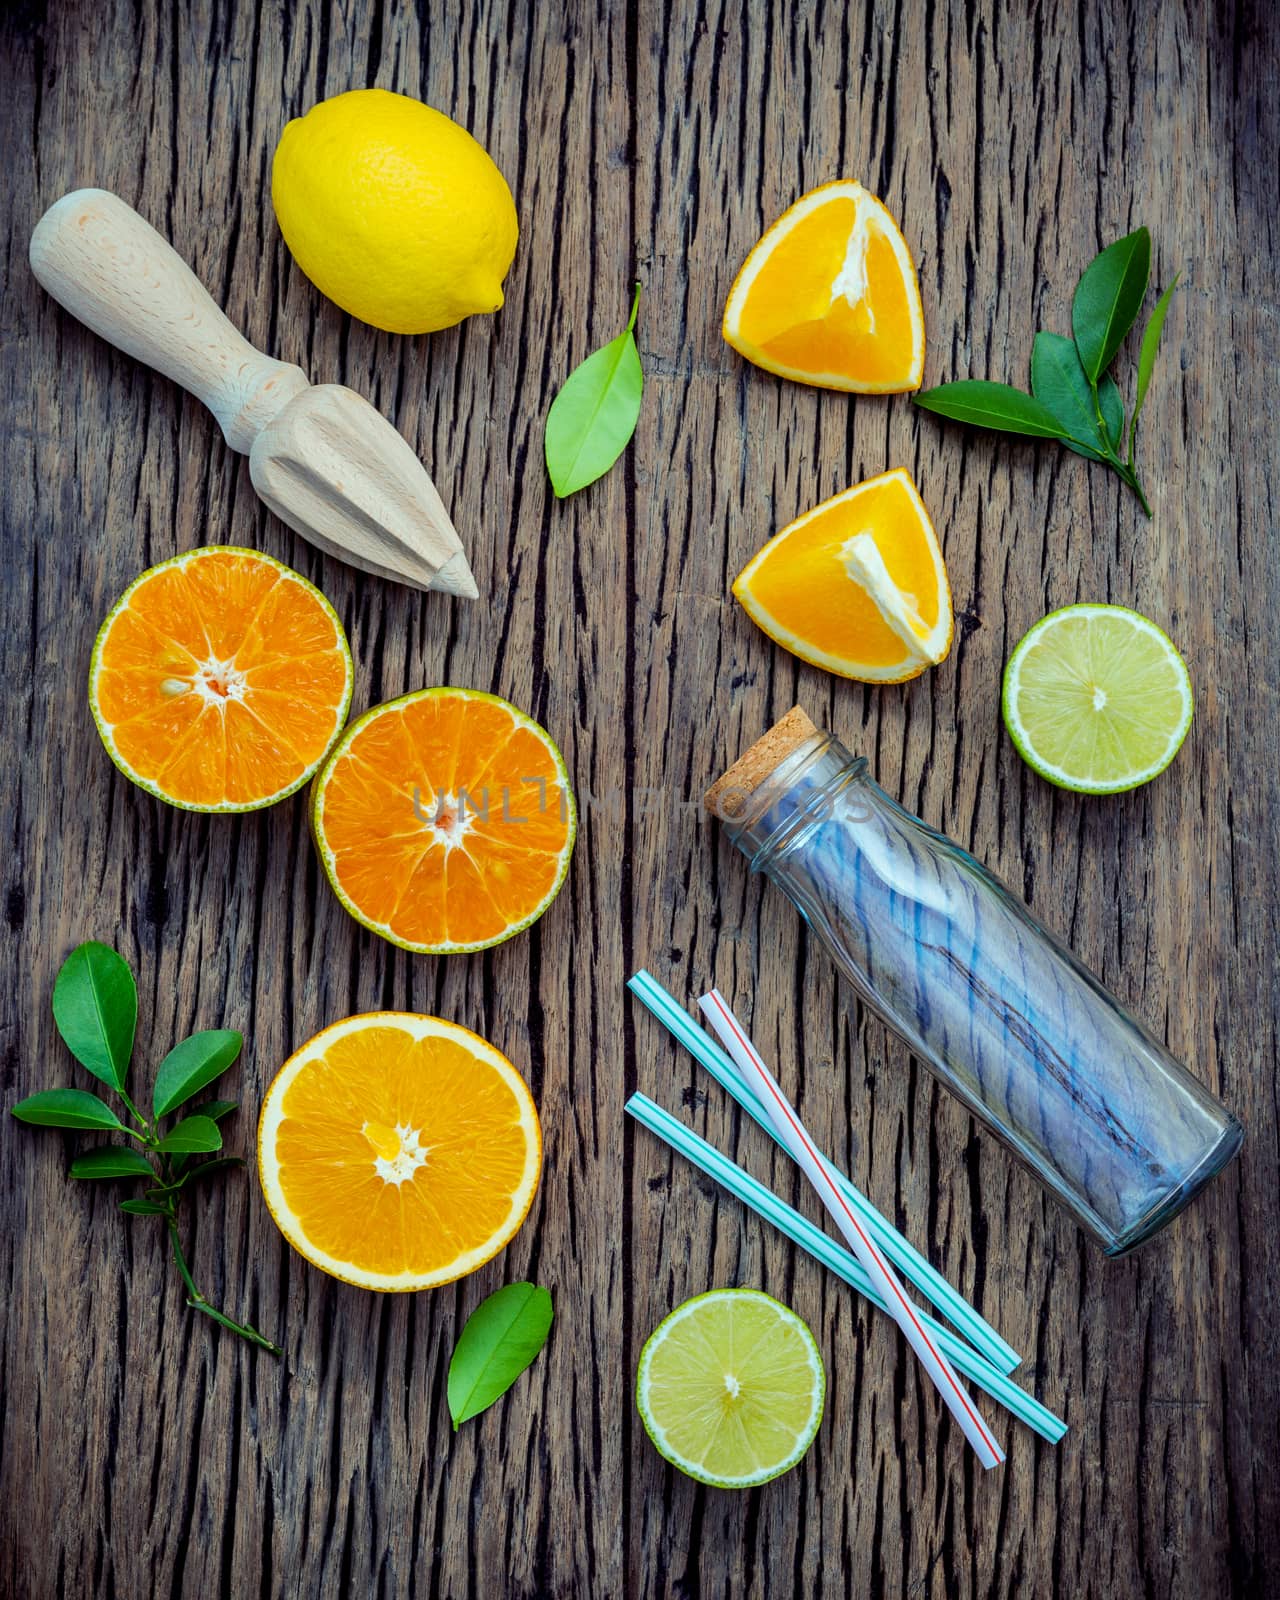 Mixed fresh citrus fruits and orange leaves background. Ingredients for summer citrus juice with juicer and glass bottle .Fresh lemons, lime and oranges set up on shabby wooden table with flat lay.